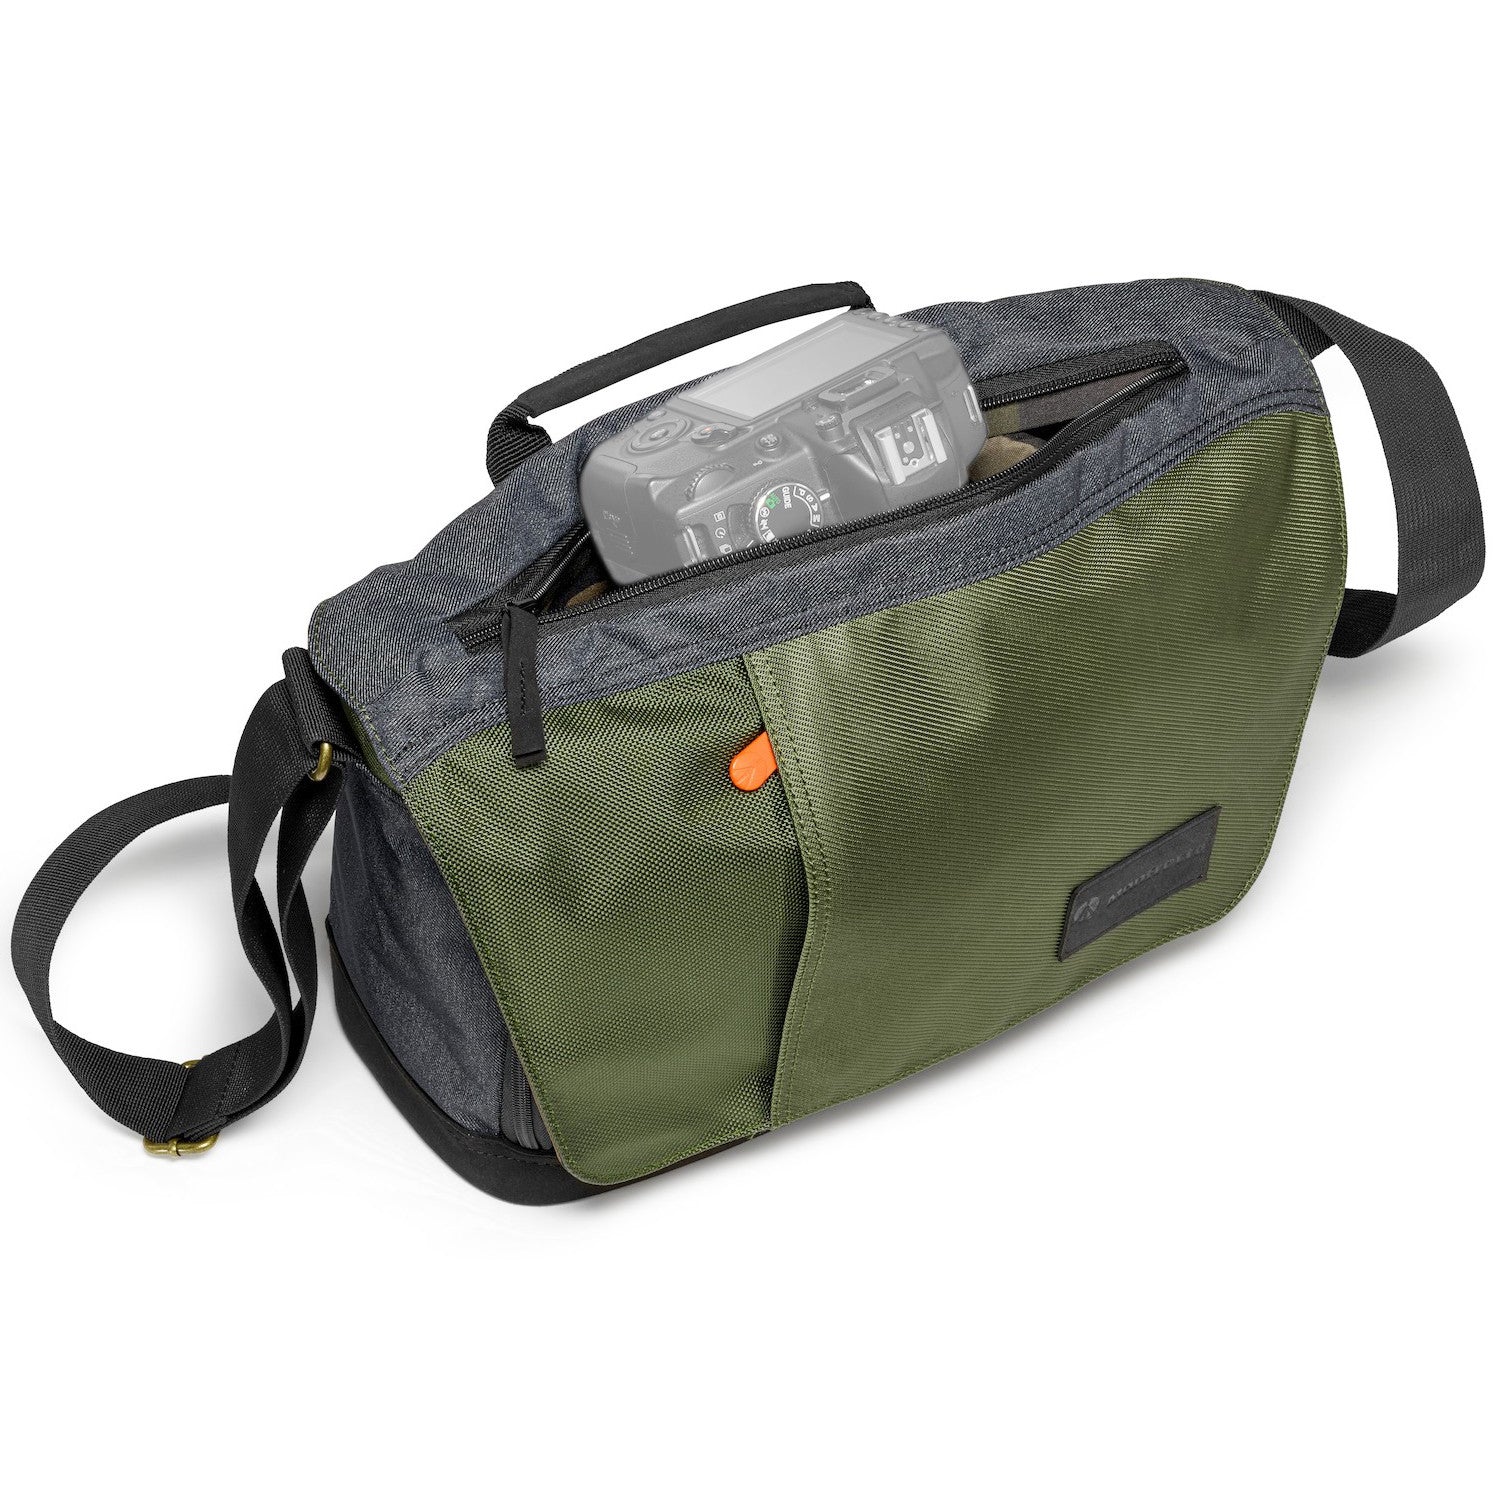 Manfrotto Street Messenger Bag for CSC or DSLR (Green and Grey), bags shoulder bags, Manfrotto - Pictureline  - 2